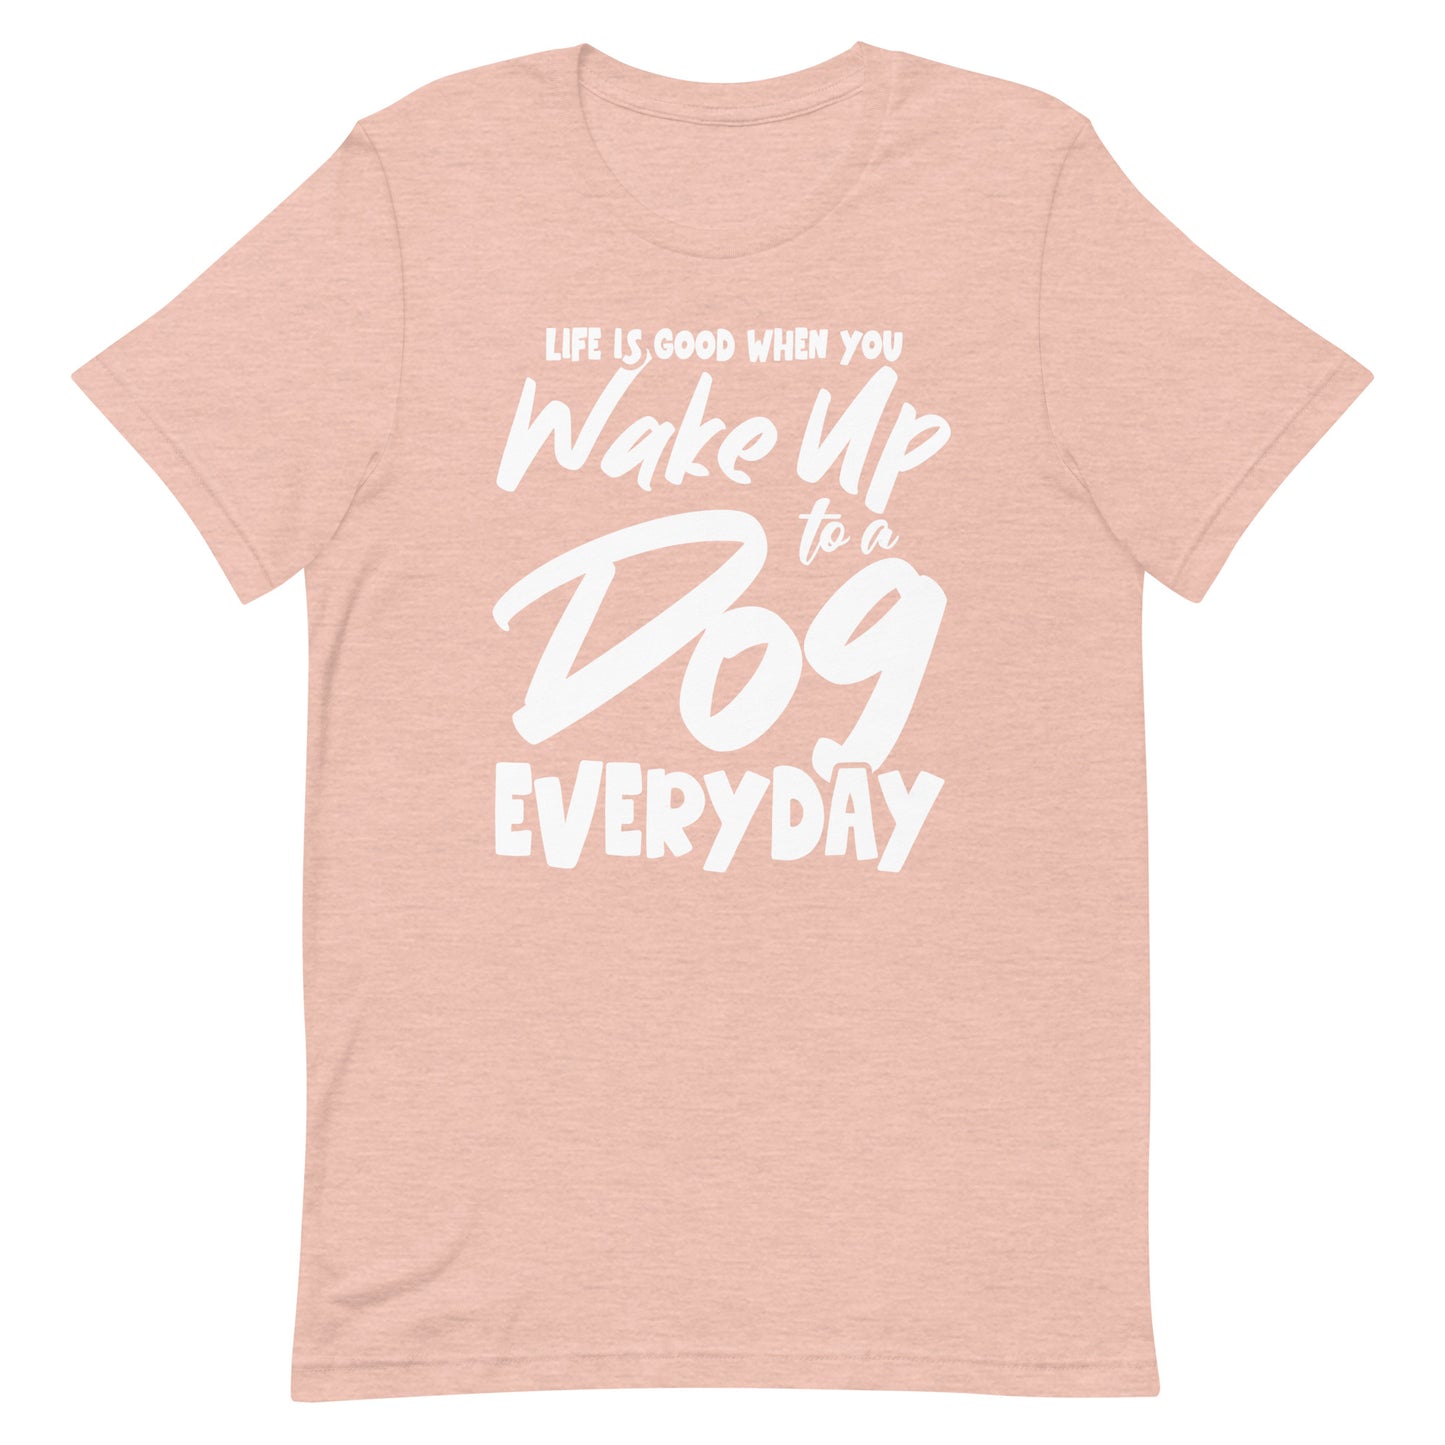 Life is Good When You Wake Up to a Dog Everyday T-Shirt